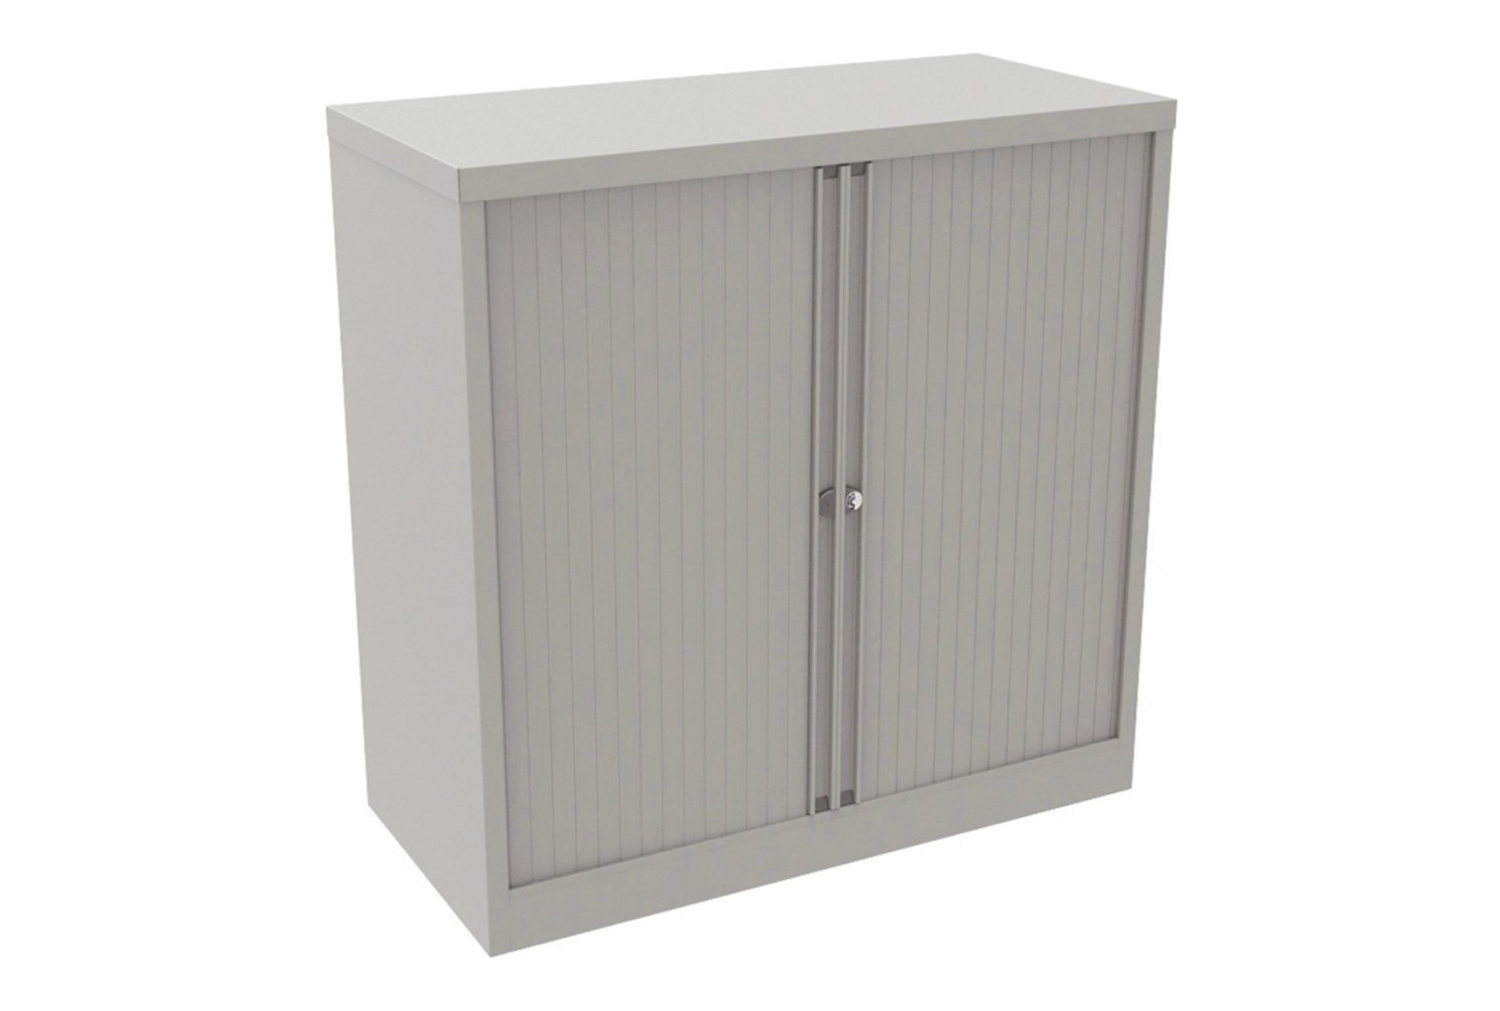 Contract Steel Tambour Office Cupboards, 100wx47dx102h (cm), Light Grey, Fully Installed